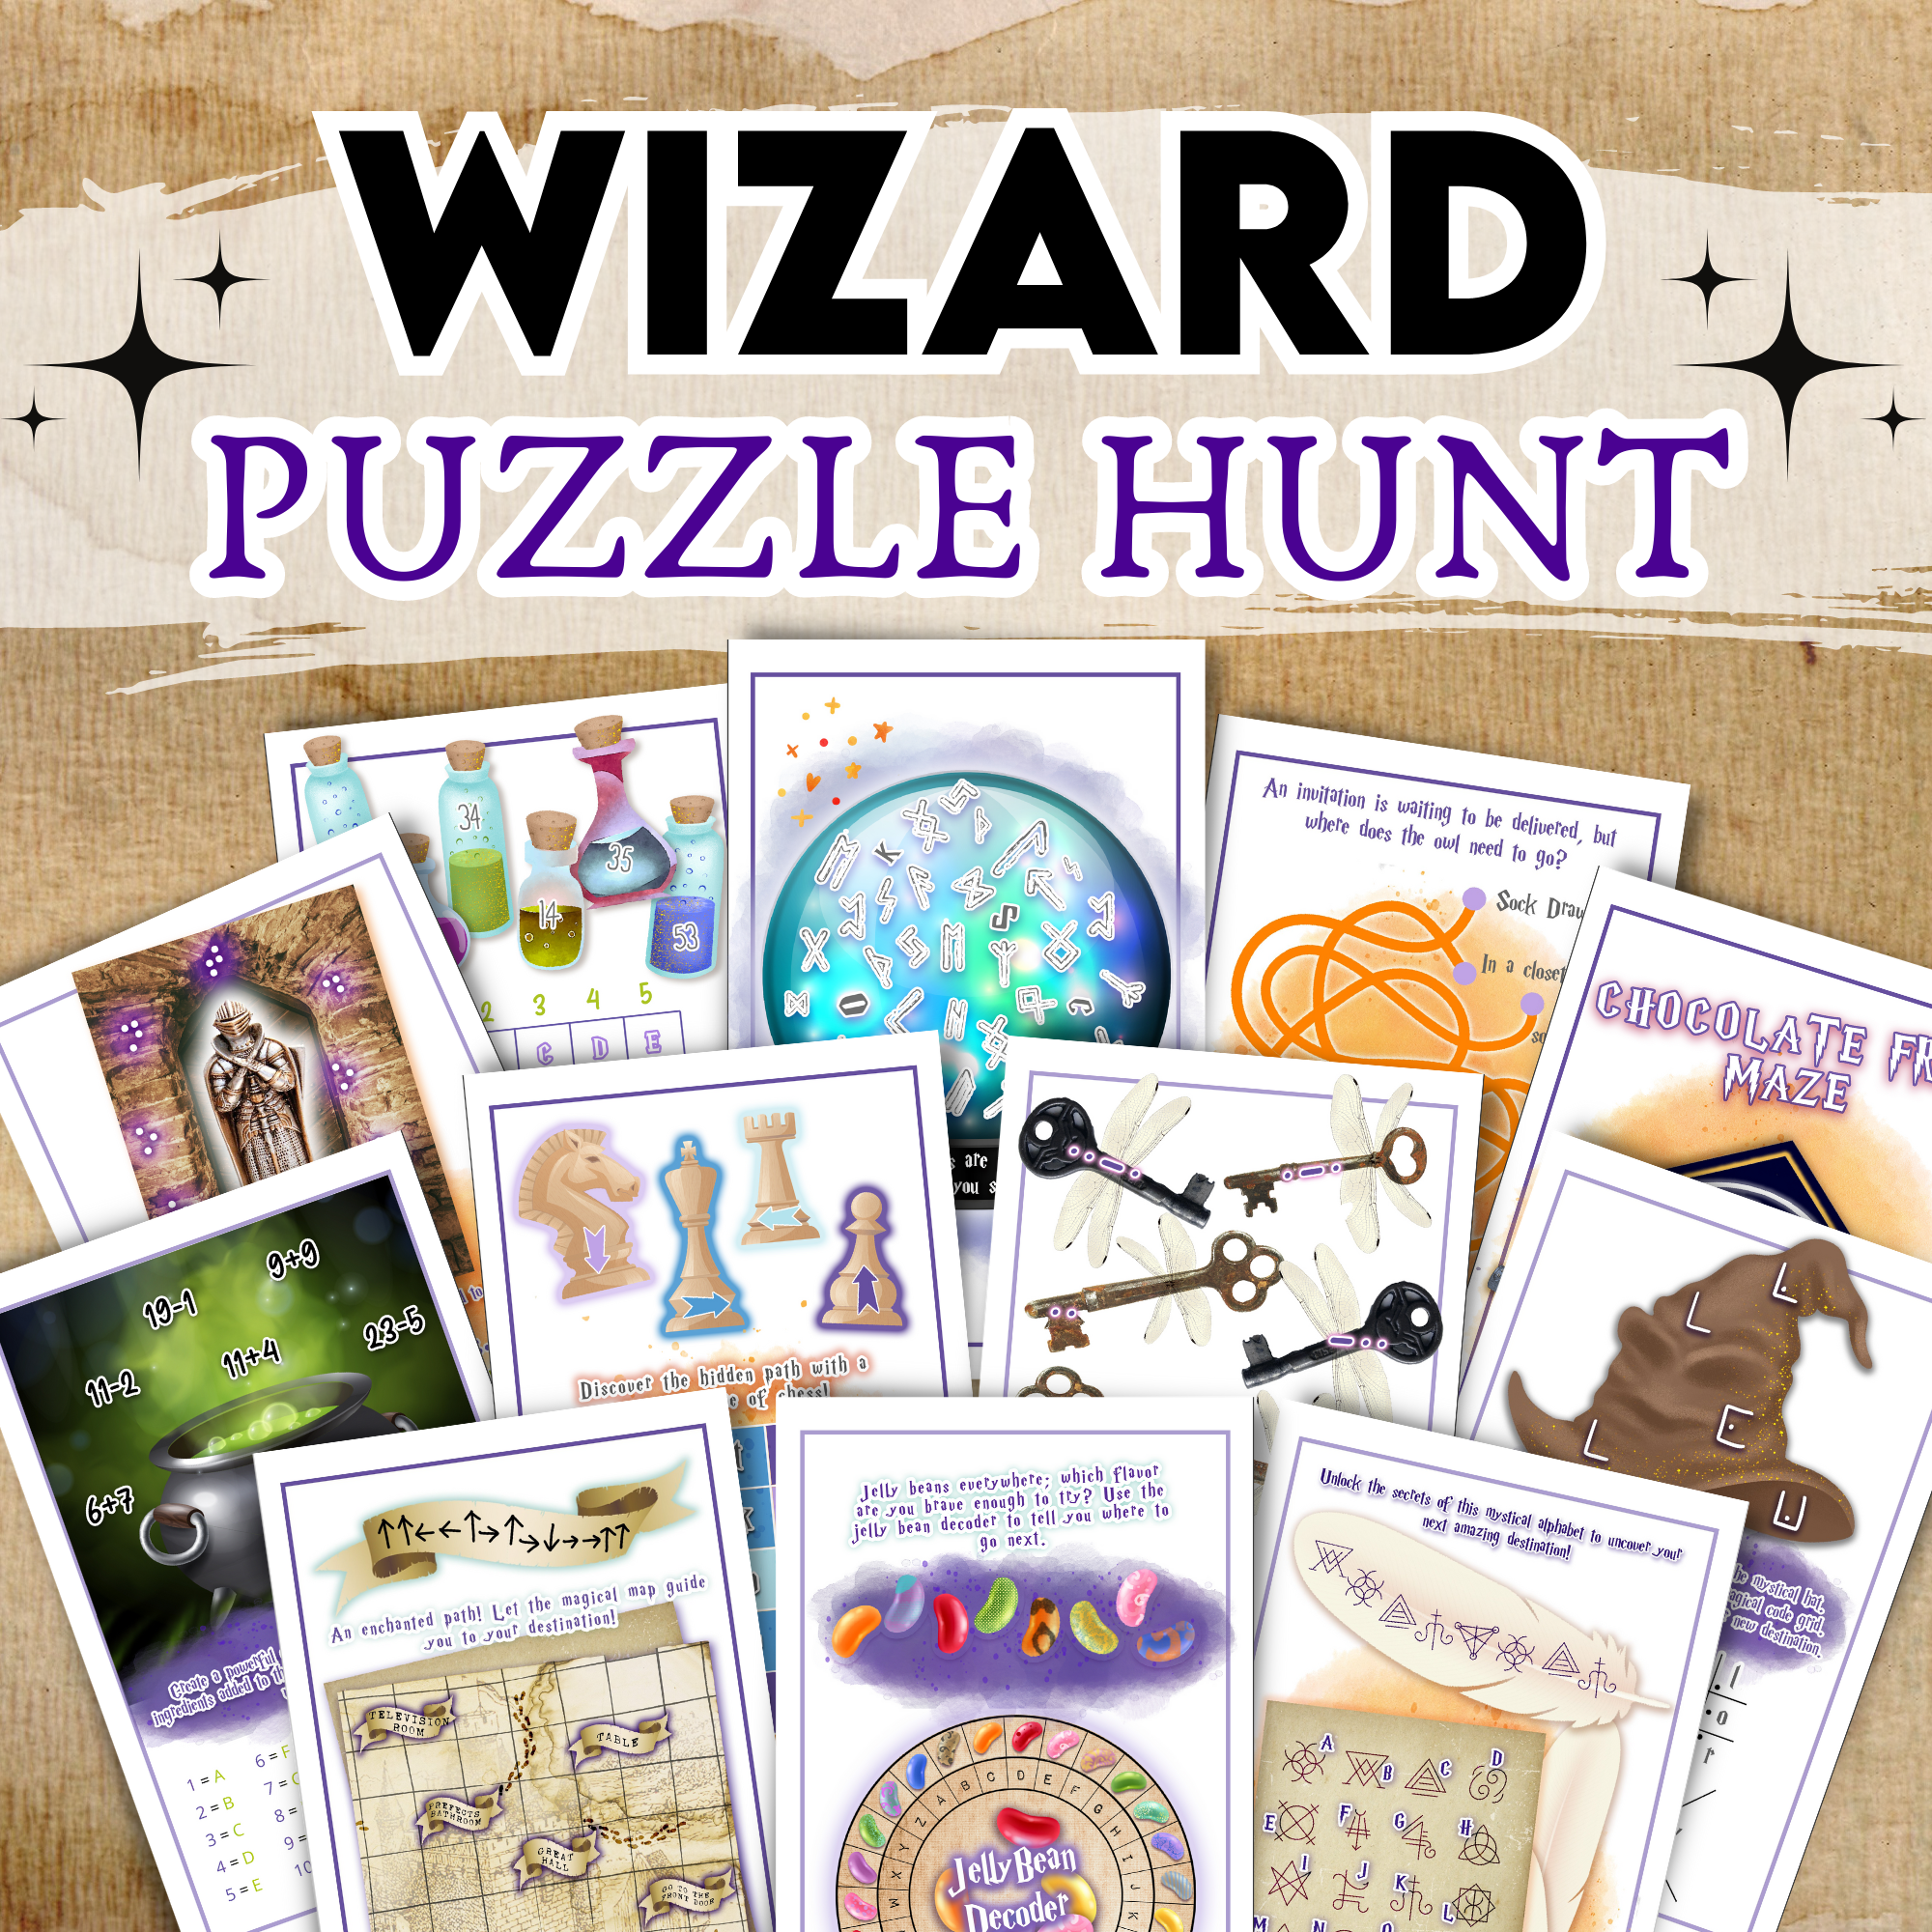 Harry Potter inspired Wizard puzzle hunt.